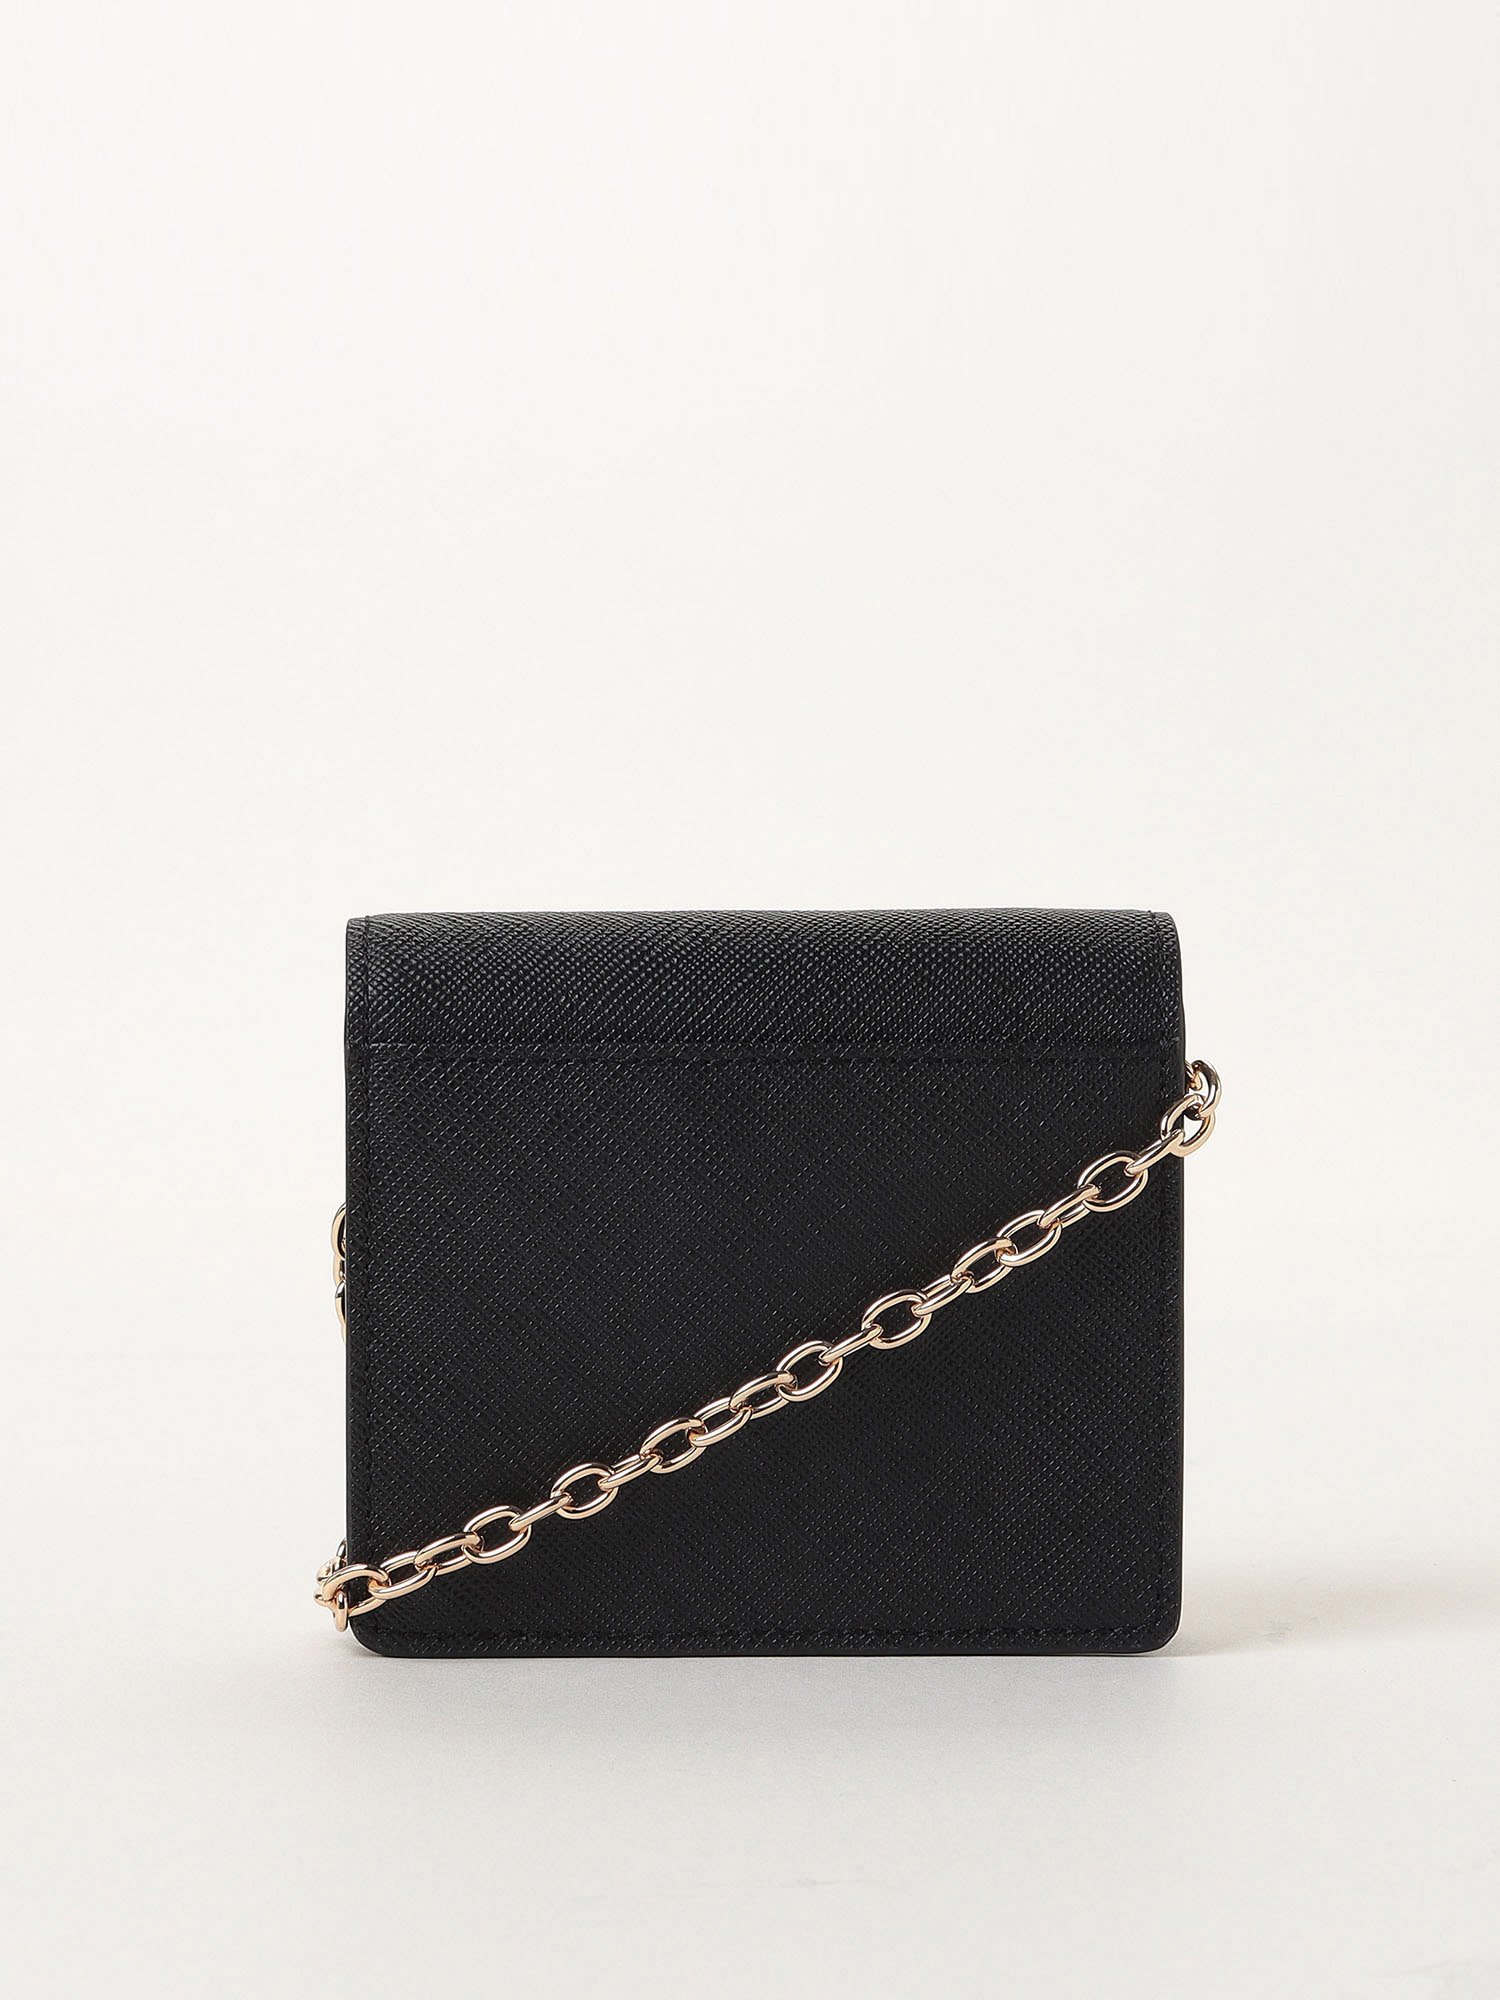 Charles & Keith - Women's Quilted Chain Strap Bag, Black, M